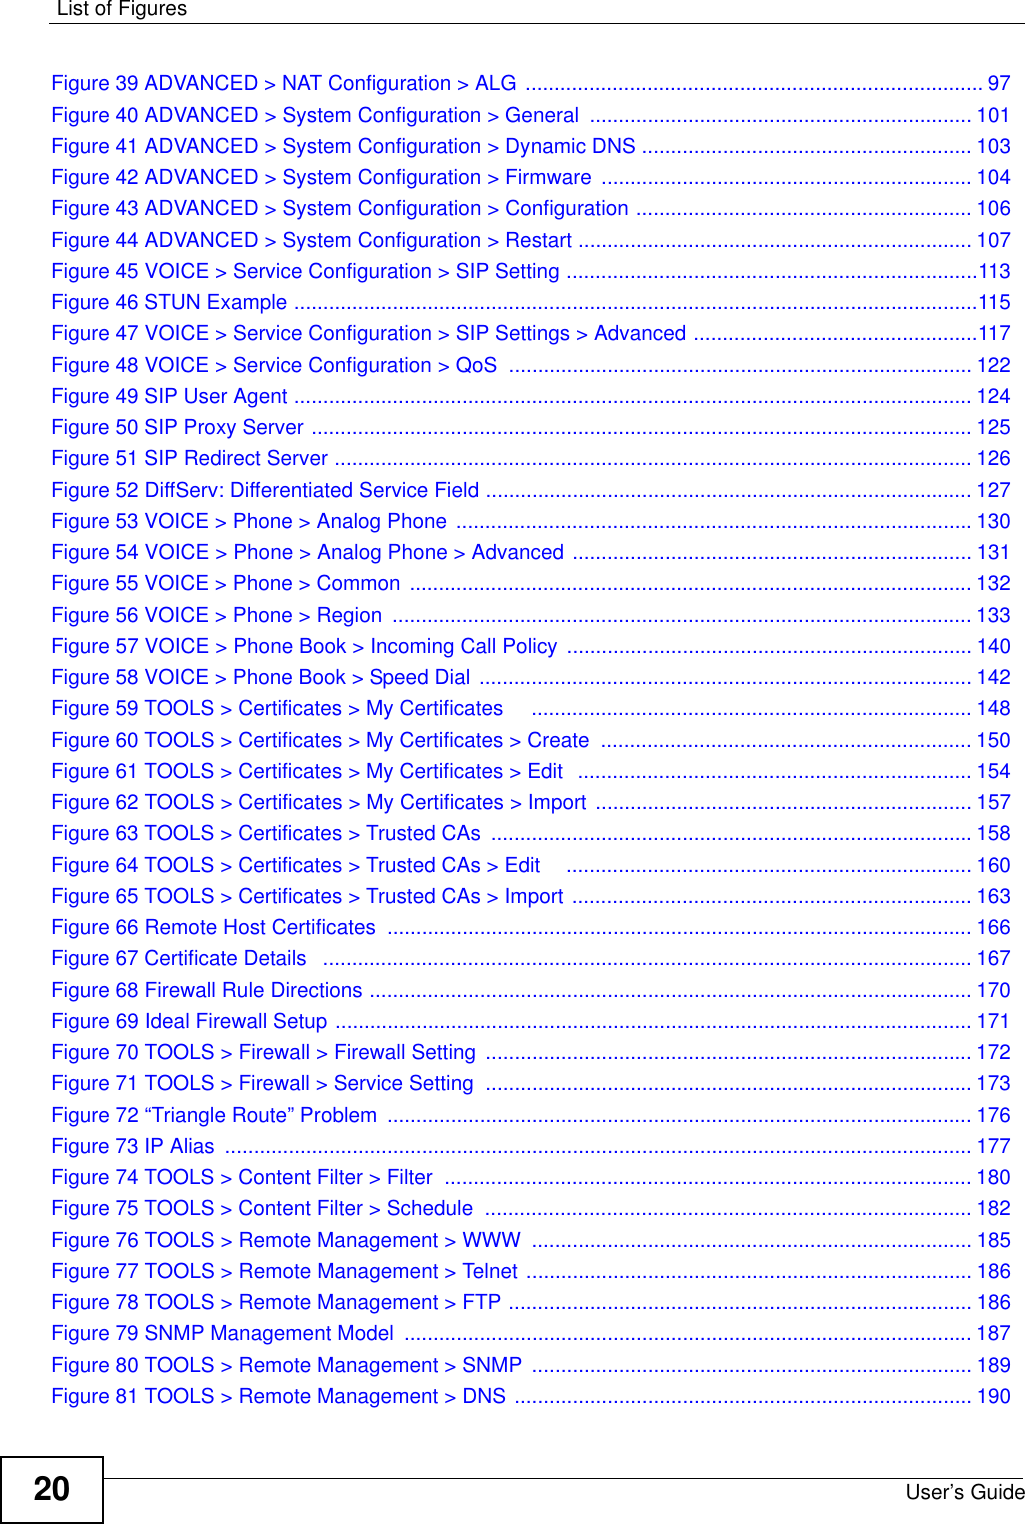 List of FiguresUser’s Guide20Figure 39 ADVANCED &gt; NAT Configuration &gt; ALG ............................................................................... 97Figure 40 ADVANCED &gt; System Configuration &gt; General .................................................................. 101Figure 41 ADVANCED &gt; System Configuration &gt; Dynamic DNS ......................................................... 103Figure 42 ADVANCED &gt; System Configuration &gt; Firmware ................................................................ 104Figure 43 ADVANCED &gt; System Configuration &gt; Configuration .......................................................... 106Figure 44 ADVANCED &gt; System Configuration &gt; Restart .................................................................... 107Figure 45 VOICE &gt; Service Configuration &gt; SIP Setting .......................................................................113Figure 46 STUN Example ......................................................................................................................115Figure 47 VOICE &gt; Service Configuration &gt; SIP Settings &gt; Advanced .................................................117Figure 48 VOICE &gt; Service Configuration &gt; QoS  ................................................................................ 122Figure 49 SIP User Agent ..................................................................................................................... 124Figure 50 SIP Proxy Server .................................................................................................................. 125Figure 51 SIP Redirect Server .............................................................................................................. 126Figure 52 DiffServ: Differentiated Service Field .................................................................................... 127Figure 53 VOICE &gt; Phone &gt; Analog Phone .........................................................................................130Figure 54 VOICE &gt; Phone &gt; Analog Phone &gt; Advanced ..................................................................... 131Figure 55 VOICE &gt; Phone &gt; Common  ................................................................................................. 132Figure 56 VOICE &gt; Phone &gt; Region  .................................................................................................... 133Figure 57 VOICE &gt; Phone Book &gt; Incoming Call Policy ...................................................................... 140Figure 58 VOICE &gt; Phone Book &gt; Speed Dial ..................................................................................... 142Figure 59 TOOLS &gt; Certificates &gt; My Certificates     ............................................................................148Figure 60 TOOLS &gt; Certificates &gt; My Certificates &gt; Create  ................................................................ 150Figure 61 TOOLS &gt; Certificates &gt; My Certificates &gt; Edit  .................................................................... 154Figure 62 TOOLS &gt; Certificates &gt; My Certificates &gt; Import ................................................................. 157Figure 63 TOOLS &gt; Certificates &gt; Trusted CAs  ...................................................................................158Figure 64 TOOLS &gt; Certificates &gt; Trusted CAs &gt; Edit    ...................................................................... 160Figure 65 TOOLS &gt; Certificates &gt; Trusted CAs &gt; Import ..................................................................... 163Figure 66 Remote Host Certificates ..................................................................................................... 166Figure 67 Certificate Details   ................................................................................................................ 167Figure 68 Firewall Rule Directions ........................................................................................................ 170Figure 69 Ideal Firewall Setup .............................................................................................................. 171Figure 70 TOOLS &gt; Firewall &gt; Firewall Setting  .................................................................................... 172Figure 71 TOOLS &gt; Firewall &gt; Service Setting  .................................................................................... 173Figure 72 “Triangle Route” Problem ..................................................................................................... 176Figure 73 IP Alias  ................................................................................................................................. 177Figure 74 TOOLS &gt; Content Filter &gt; Filter  ........................................................................................... 180Figure 75 TOOLS &gt; Content Filter &gt; Schedule  ....................................................................................182Figure 76 TOOLS &gt; Remote Management &gt; WWW  ............................................................................ 185Figure 77 TOOLS &gt; Remote Management &gt; Telnet ............................................................................. 186Figure 78 TOOLS &gt; Remote Management &gt; FTP ................................................................................ 186Figure 79 SNMP Management Model  .................................................................................................. 187Figure 80 TOOLS &gt; Remote Management &gt; SNMP  ............................................................................ 189Figure 81 TOOLS &gt; Remote Management &gt; DNS ............................................................................... 190